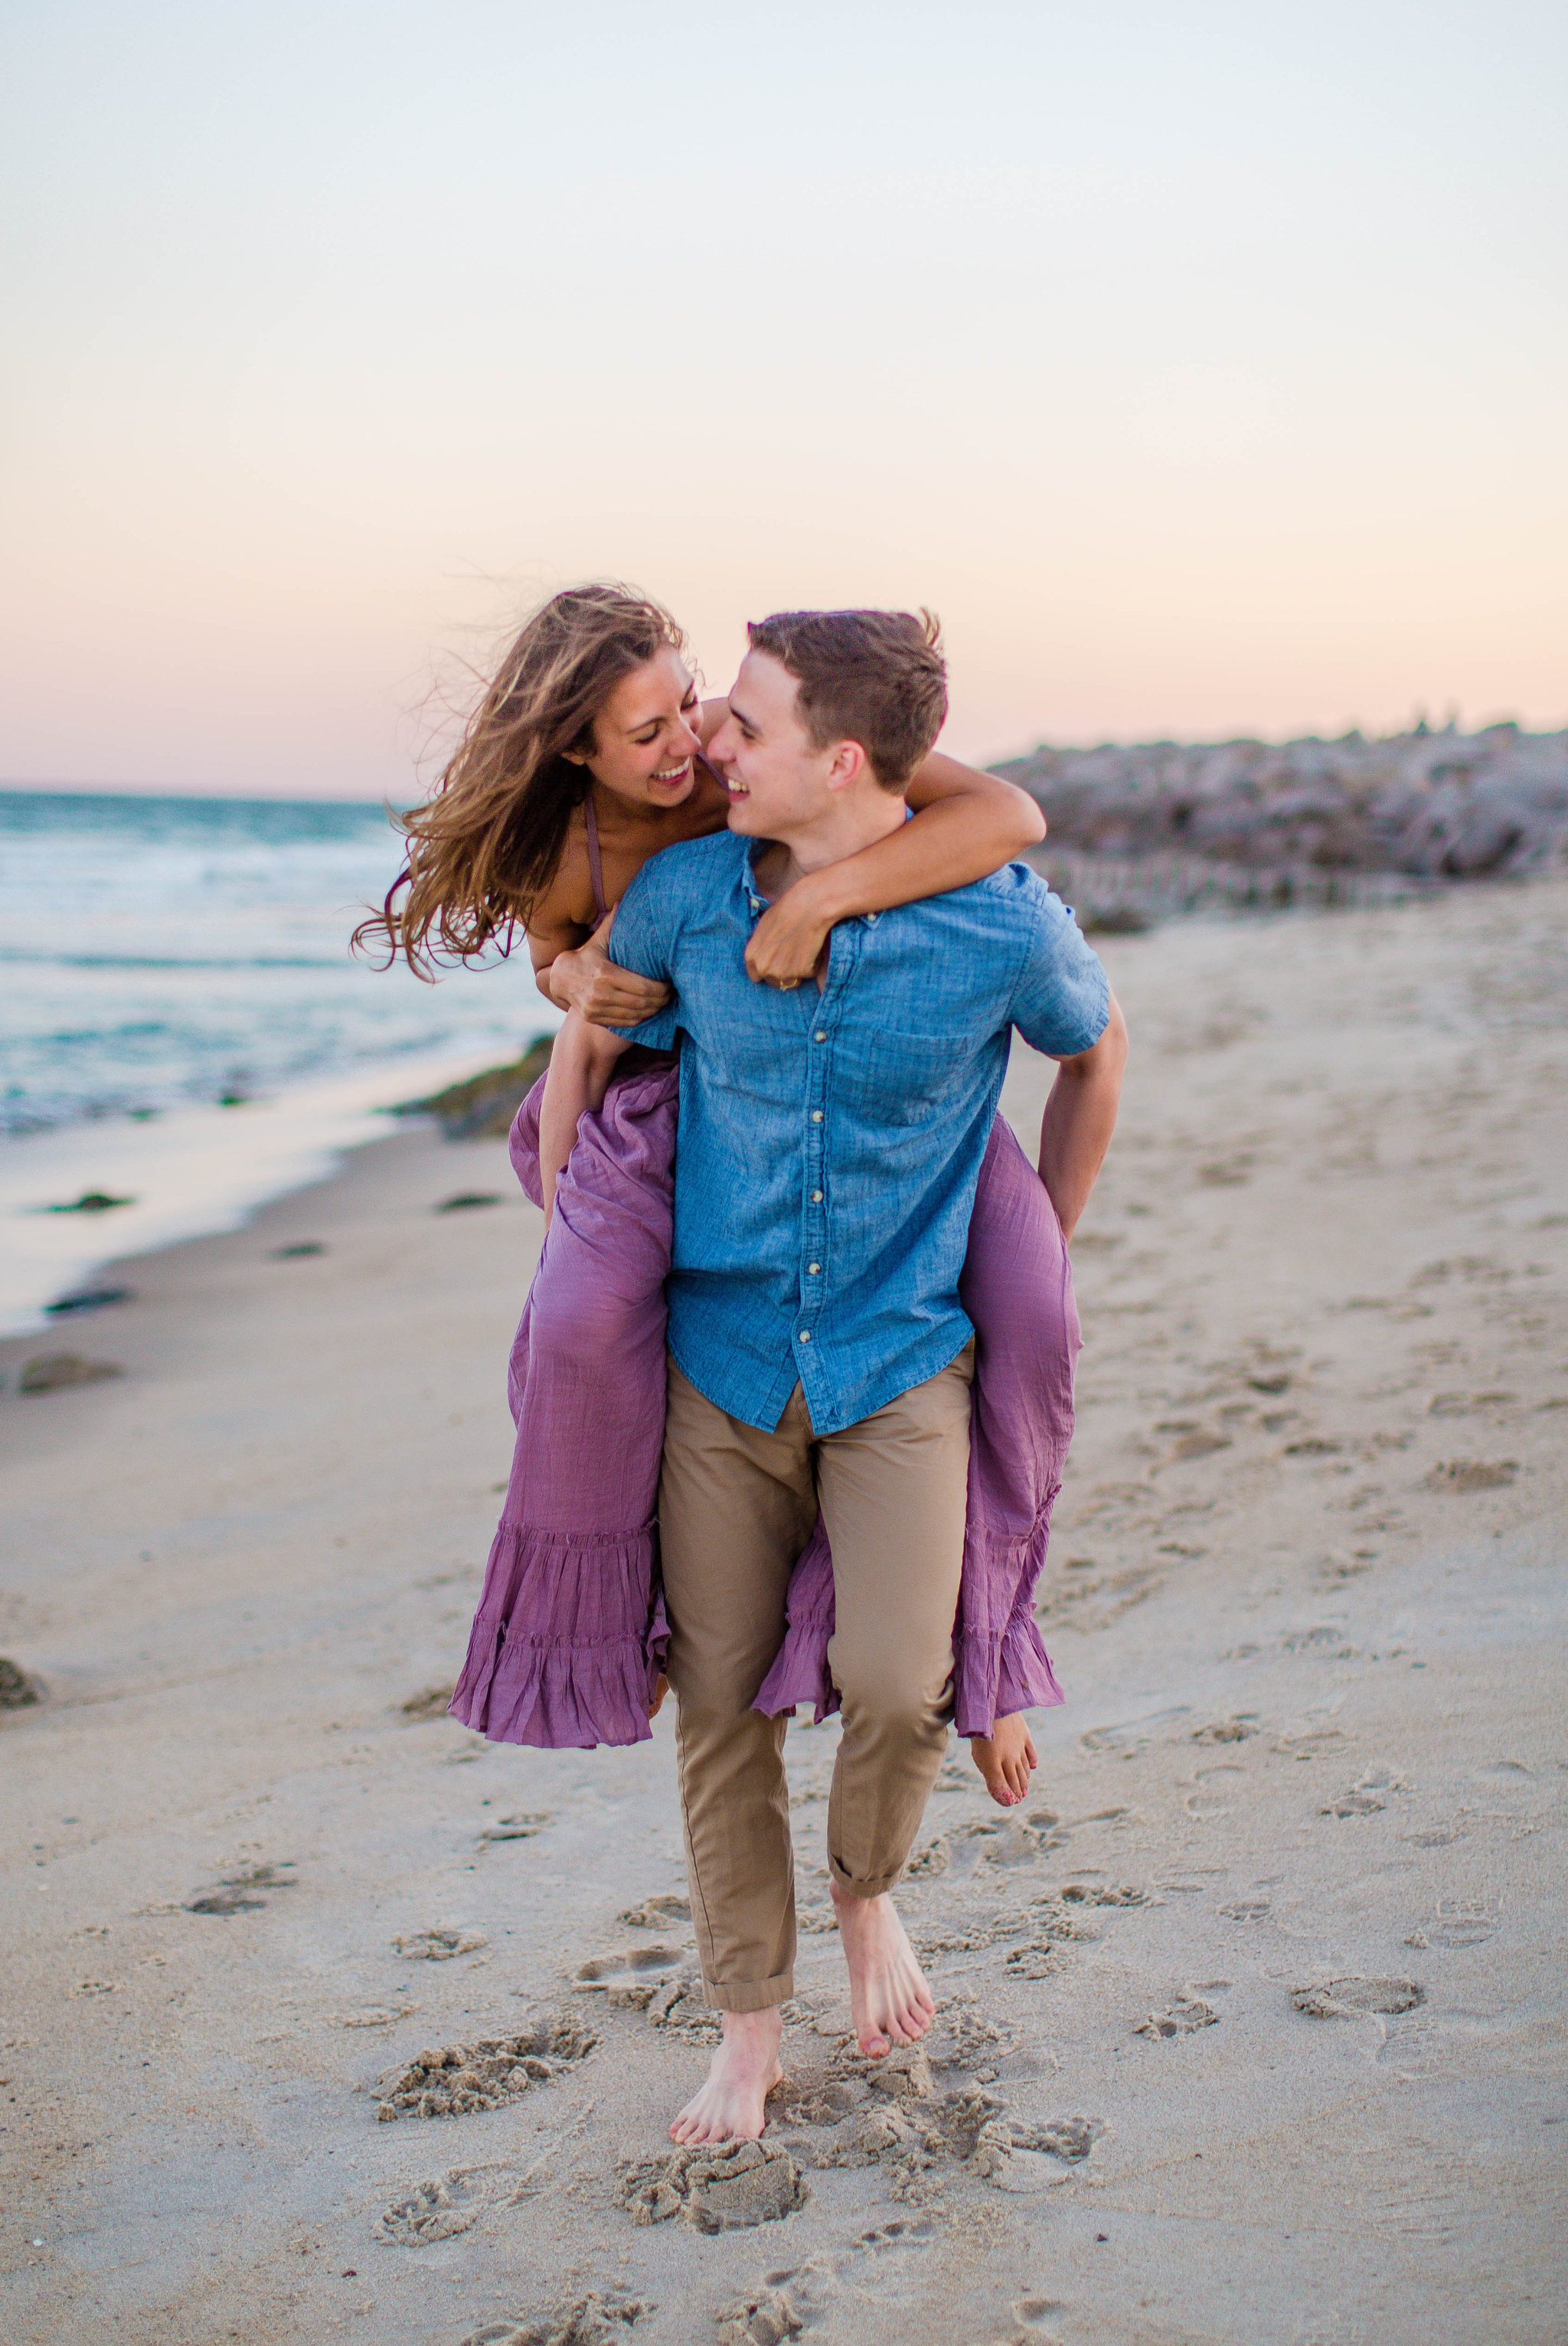  girl riding piggy back on her fiance - Woman is in a flowy pastel maxi dress - candid and unposed golden light session - beach engagement photographer in honolulu, oahu, hawaii - johanna dye photography 